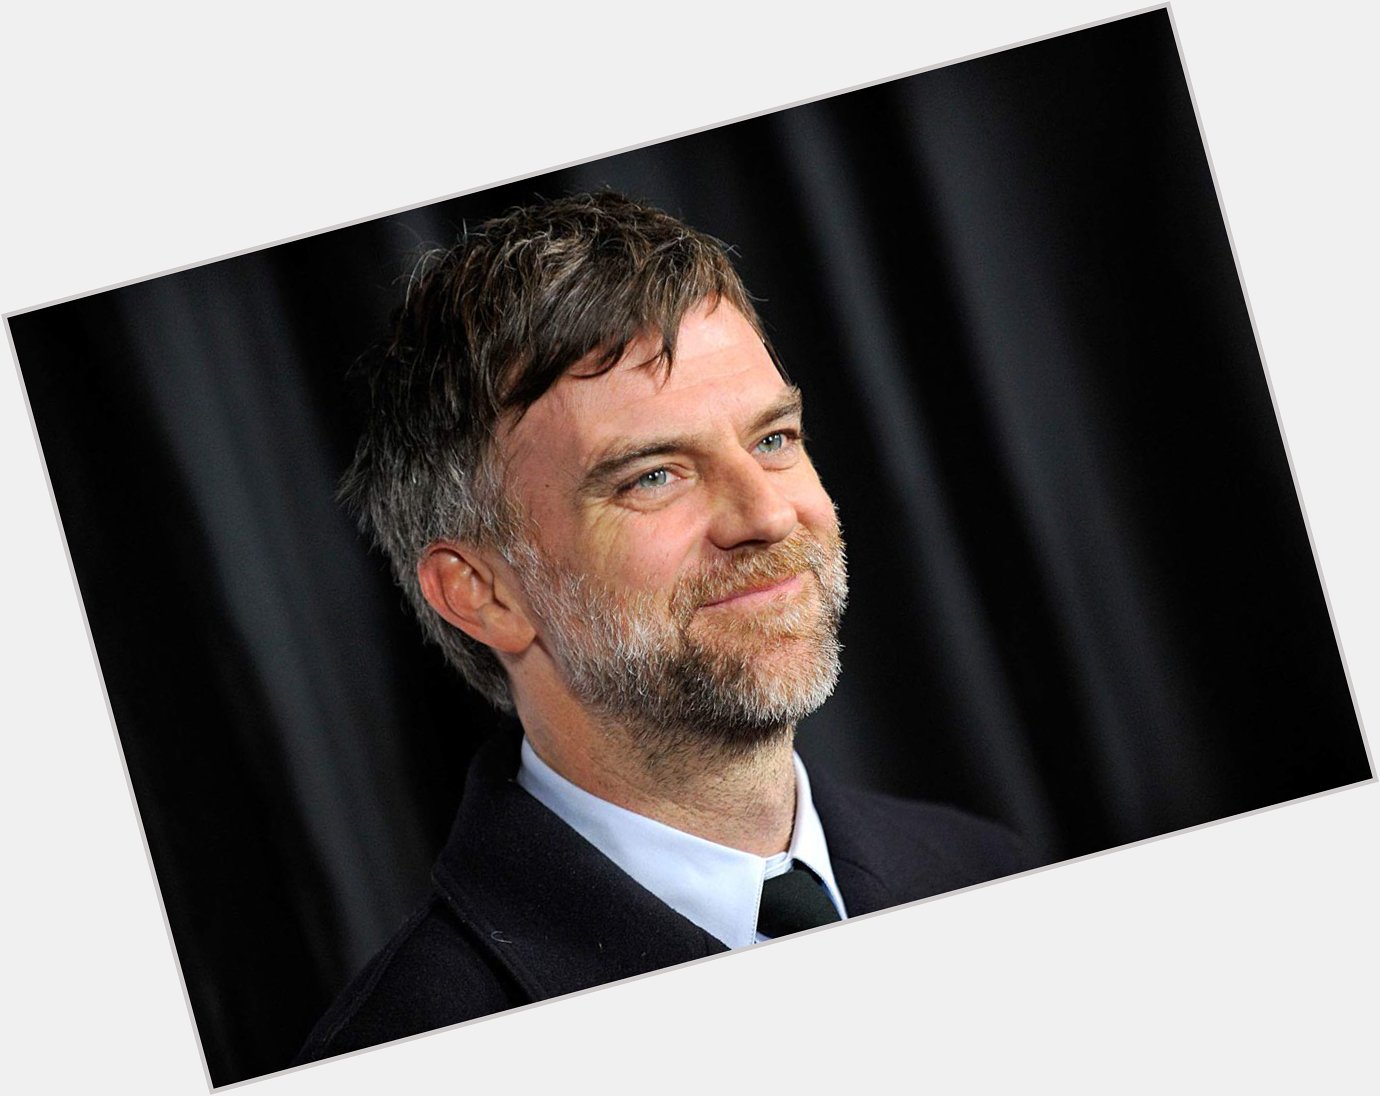 Wishing a happy birthday to the master & one of the absolute greatest filmmakers, Paul Thomas Anderson.    